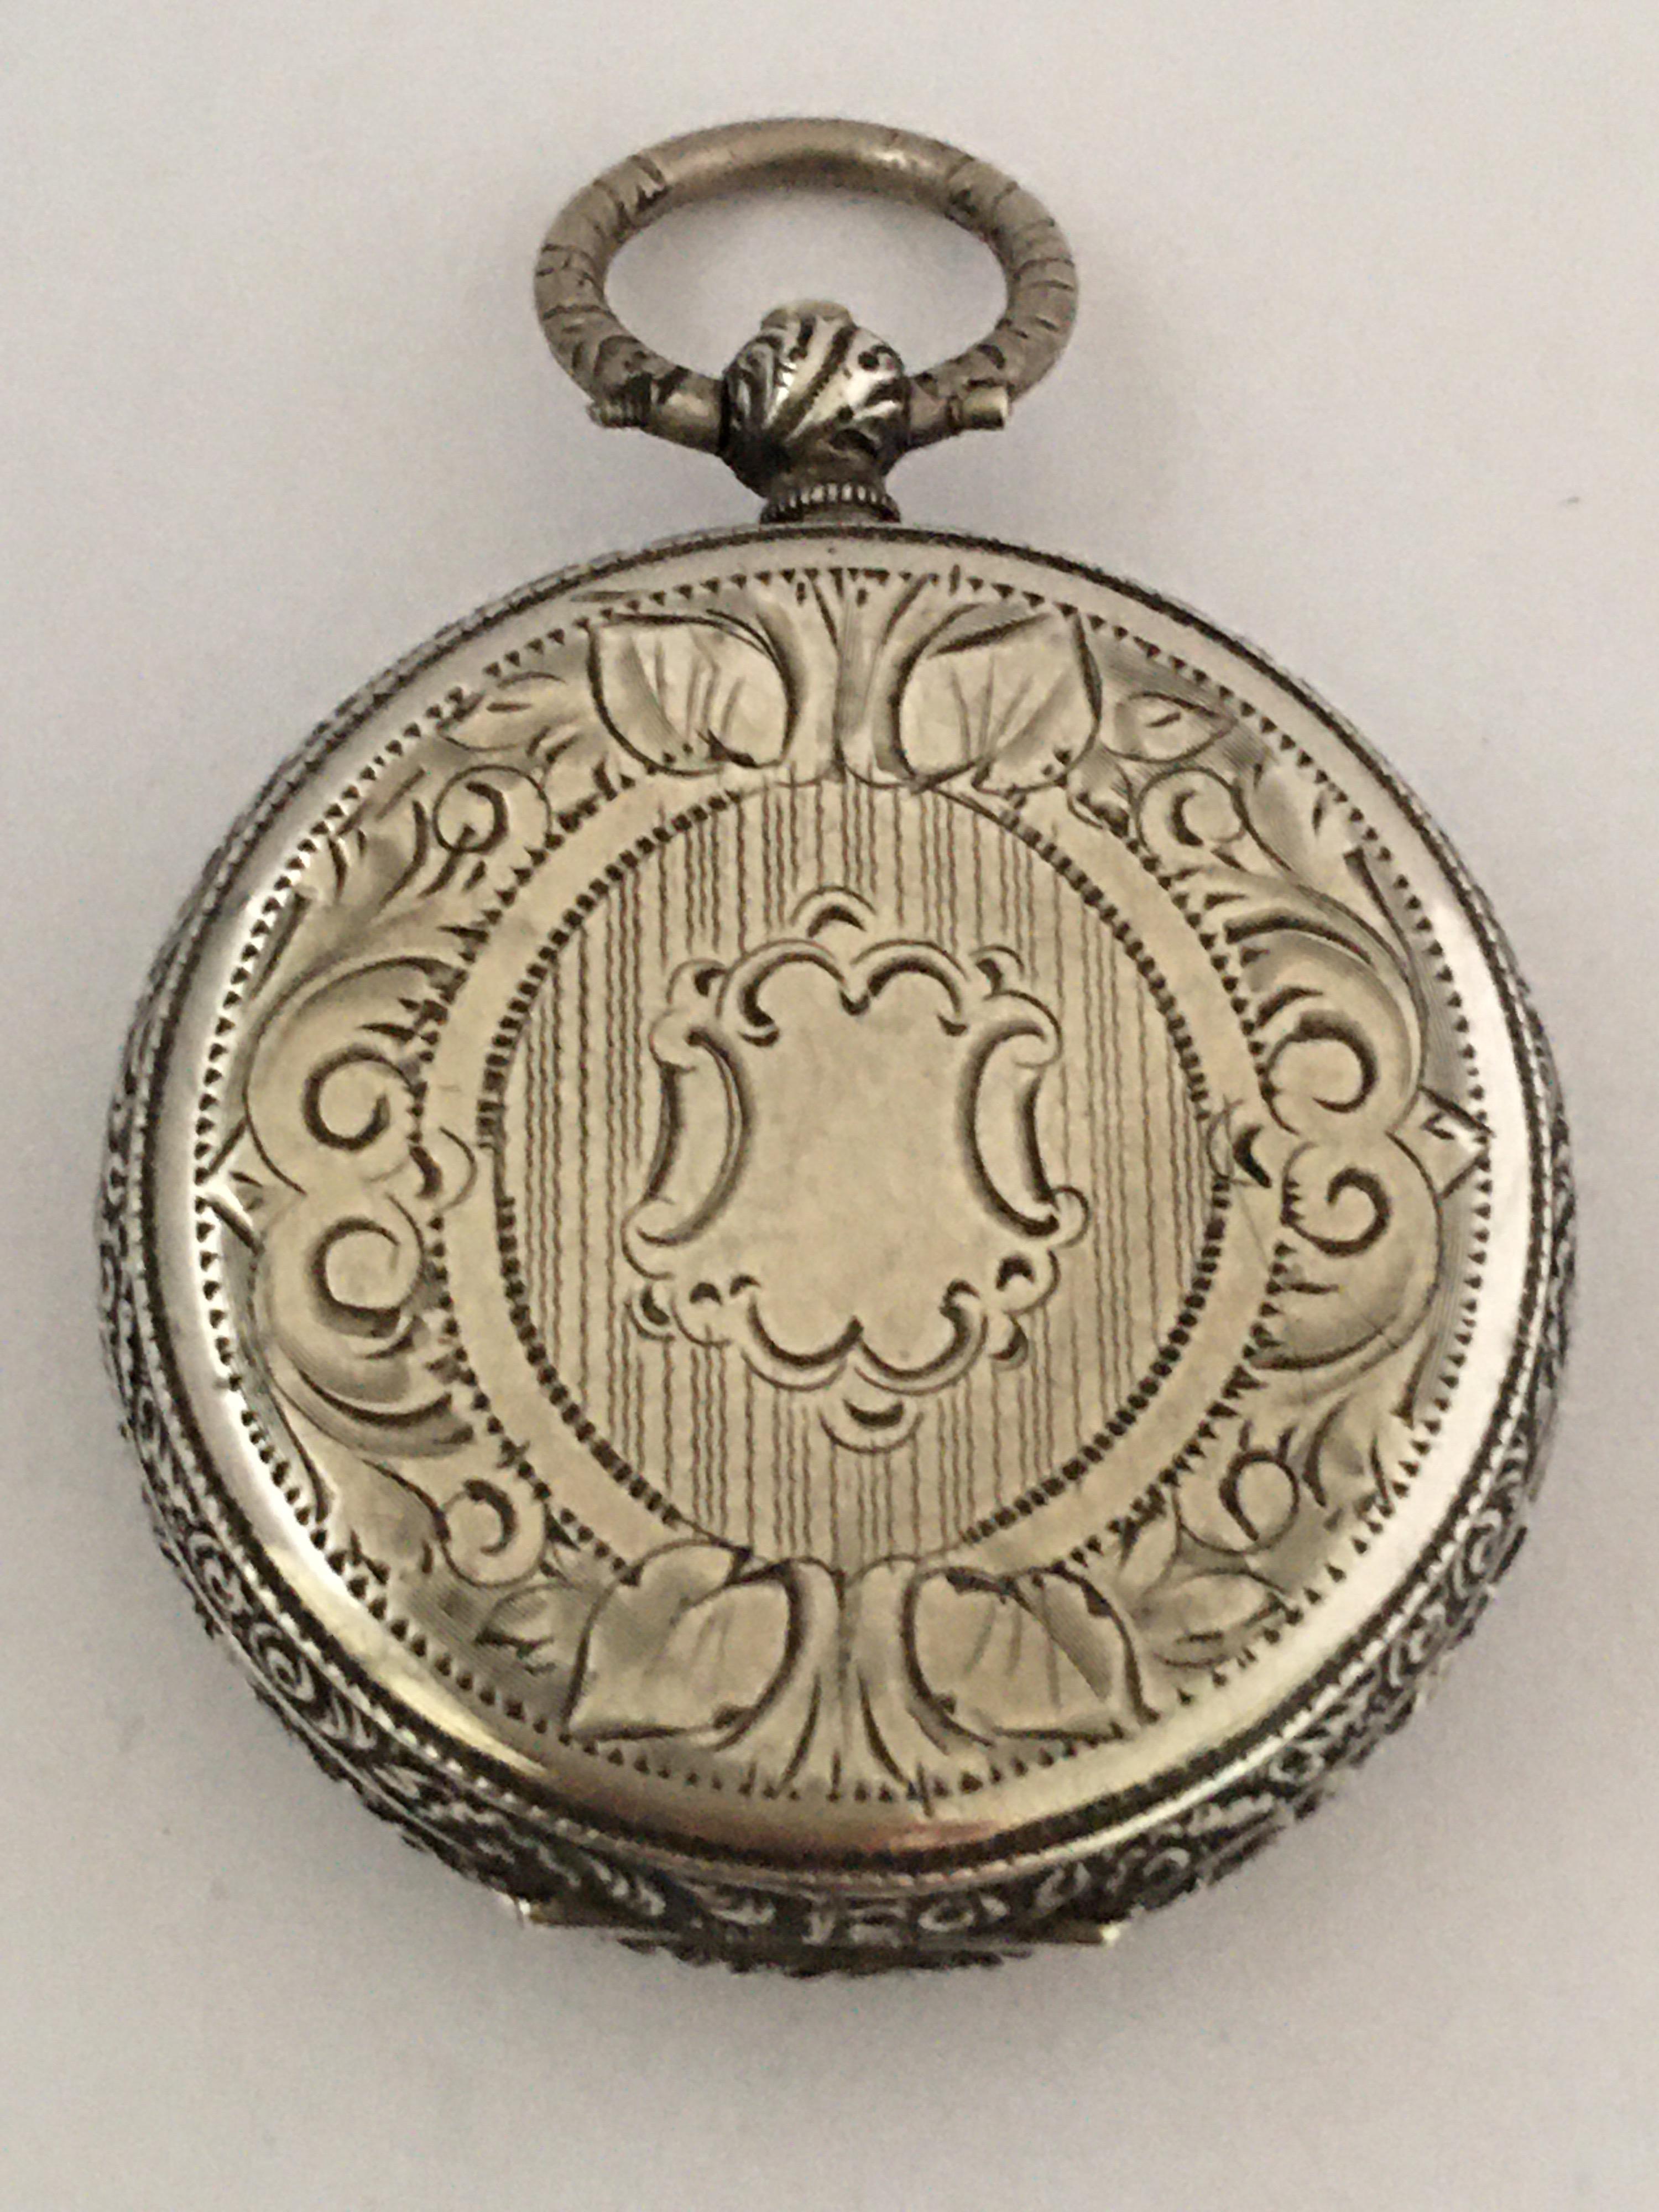 This beautiful full engraved silver case pocket watch is working and It is ticking well, however due to its age, I cannot guarantee the time accuracy ( its 8 minutes fast a day) which is normal for an antique watch with this age.

It comes with a